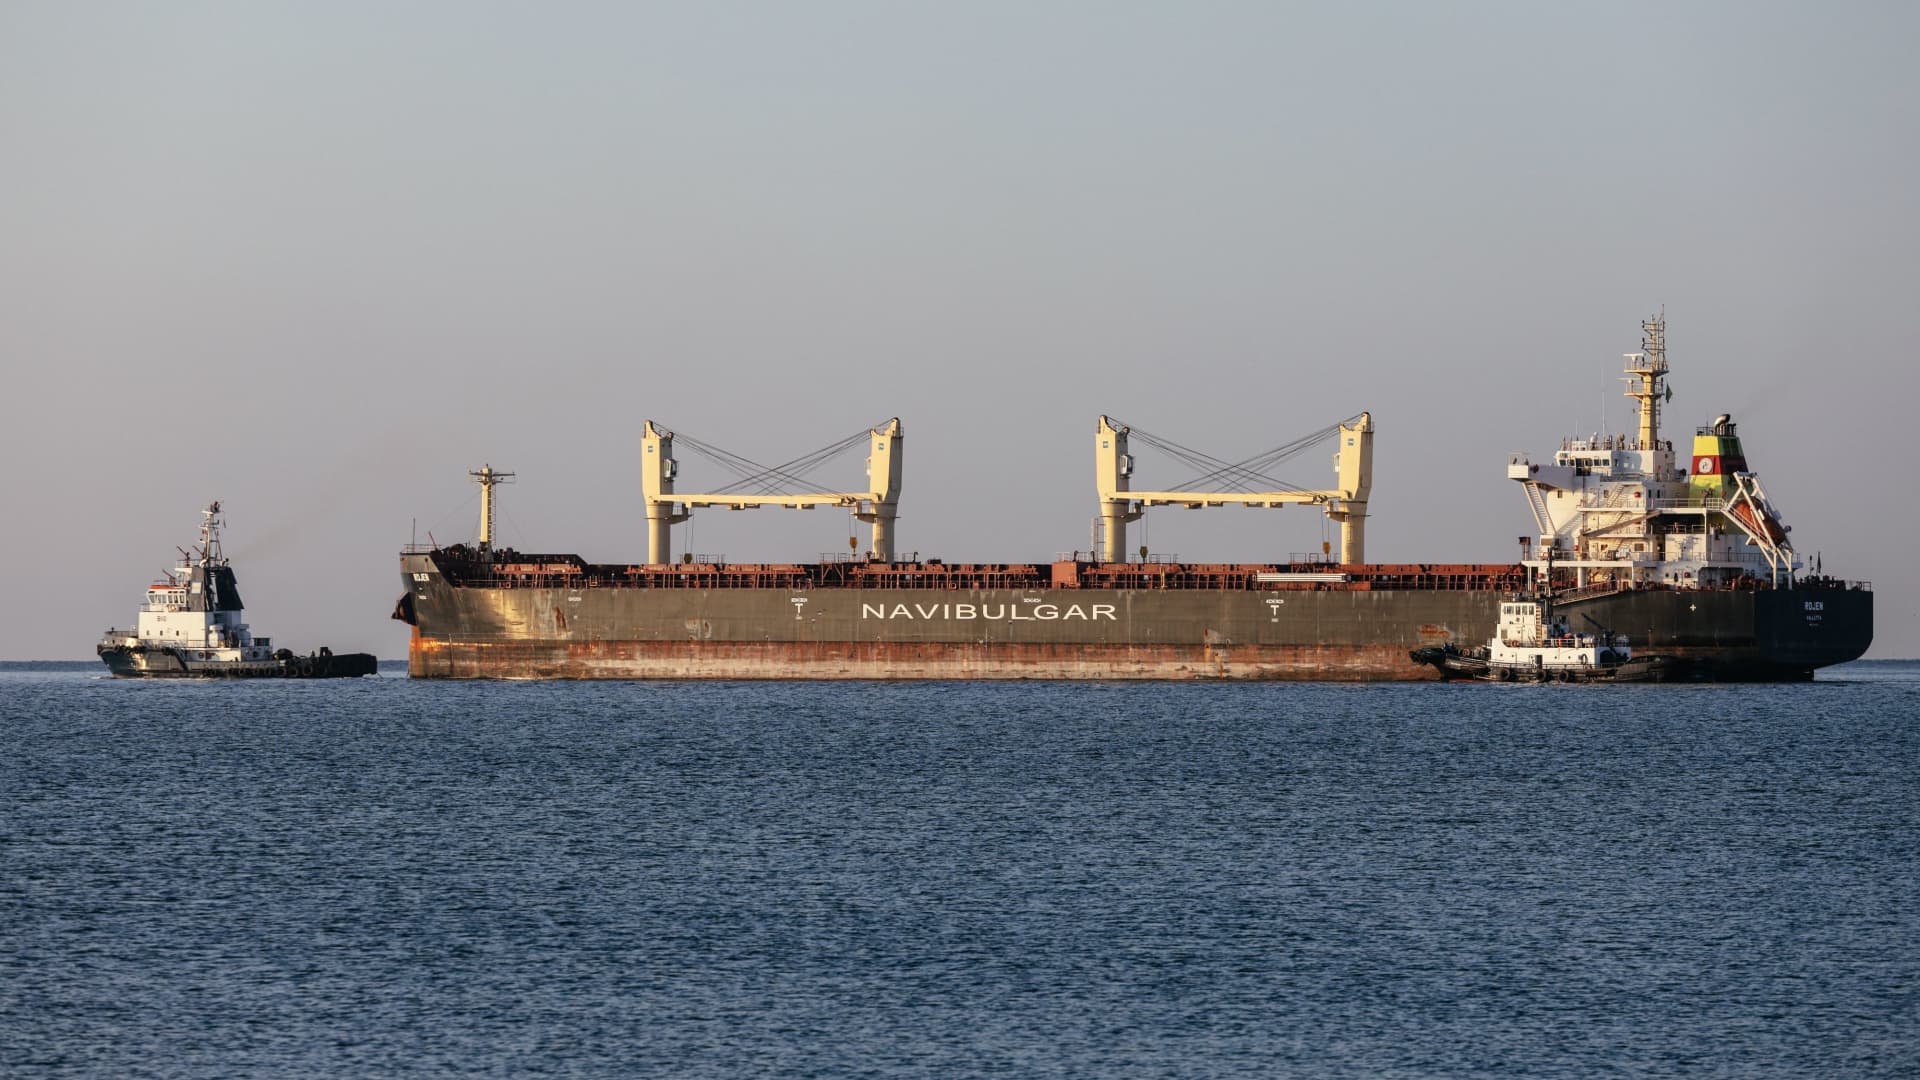 Malta-flagged bulk carrier M/V Rojen vessel, carrying tons of corn, leaves the Ukrainian port of Chornomorsk, before heading to Teesport in the United Kingdom, on August 5, 2022, amid the Russian invasion of Ukraine.